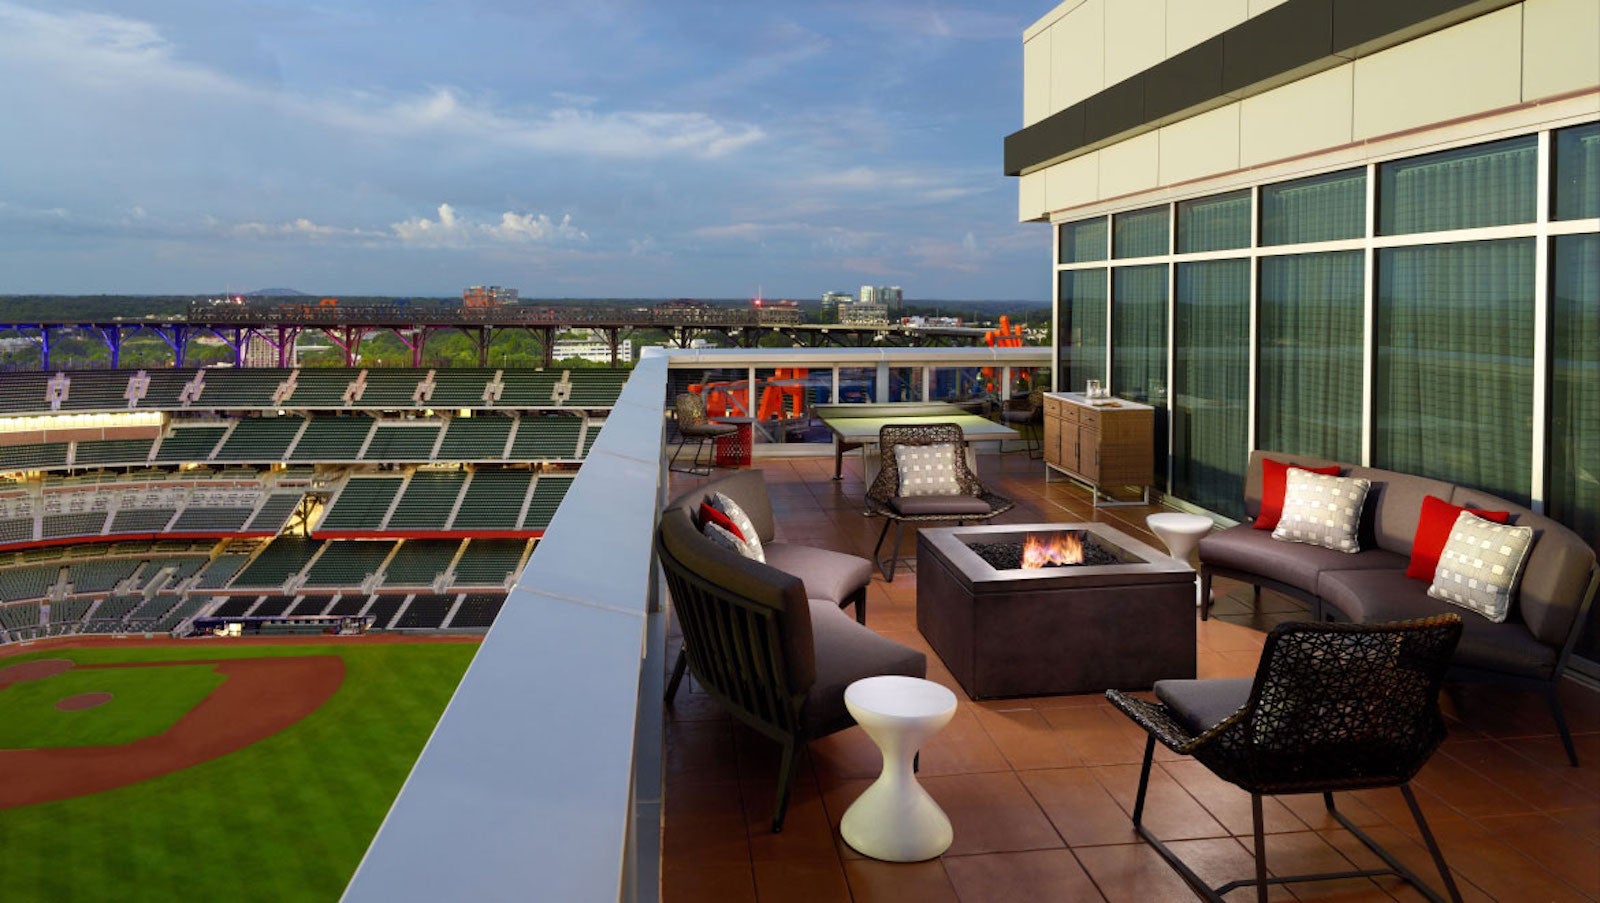 5 of the Best Hotels Near Ball Arena - The Stadiums Guide